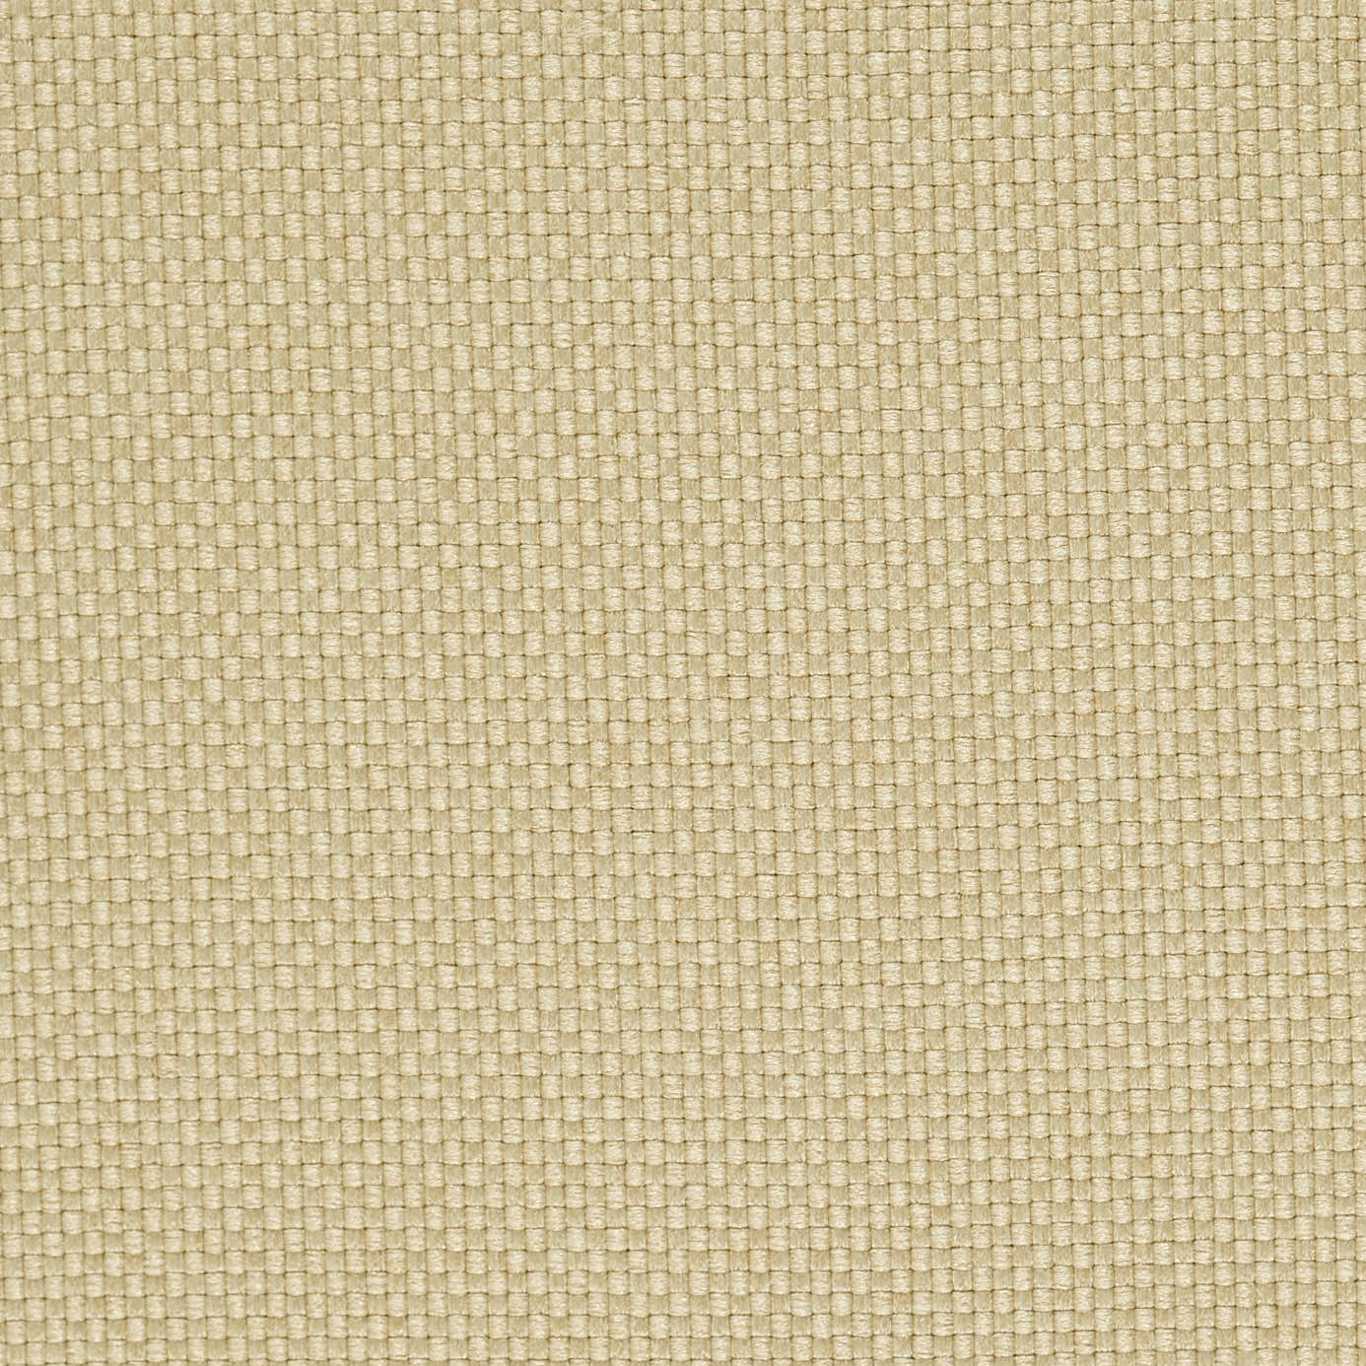 Lepton Flax Fabric by HAR